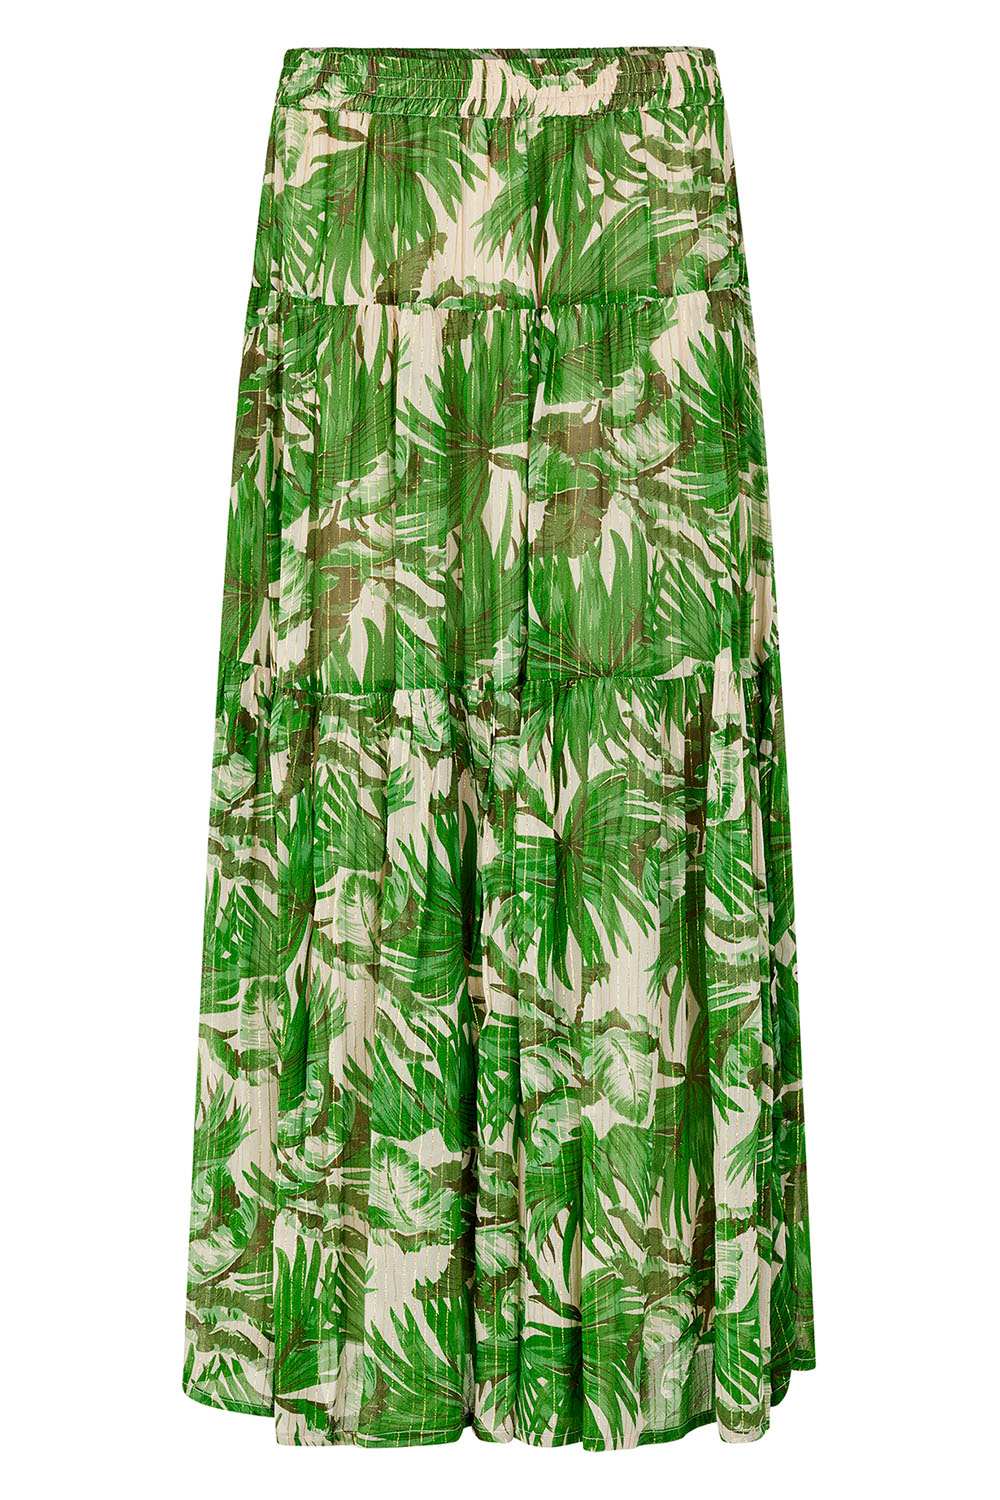 Lollys Laundry Groene Maxi Rok met Ruchedetails Multicolor Dames